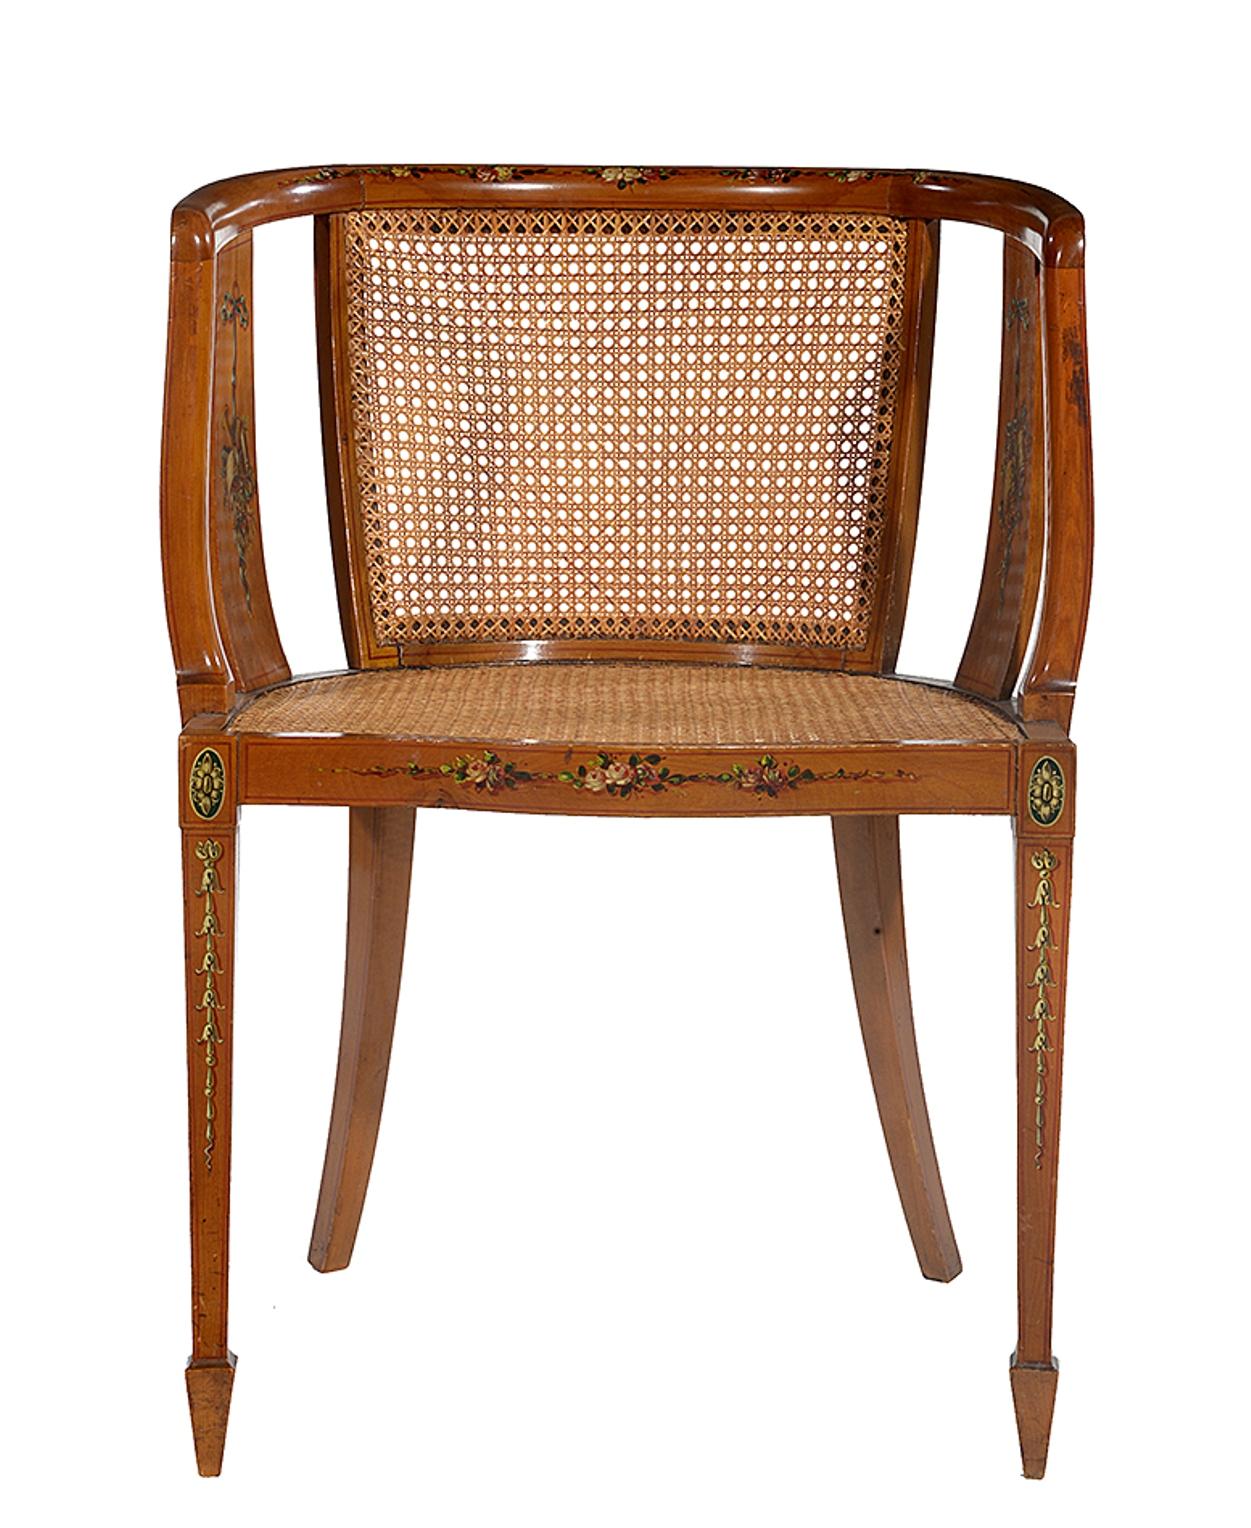 20th Century Sheraton Style Satinwood Chair with Painted Decoration For Sale